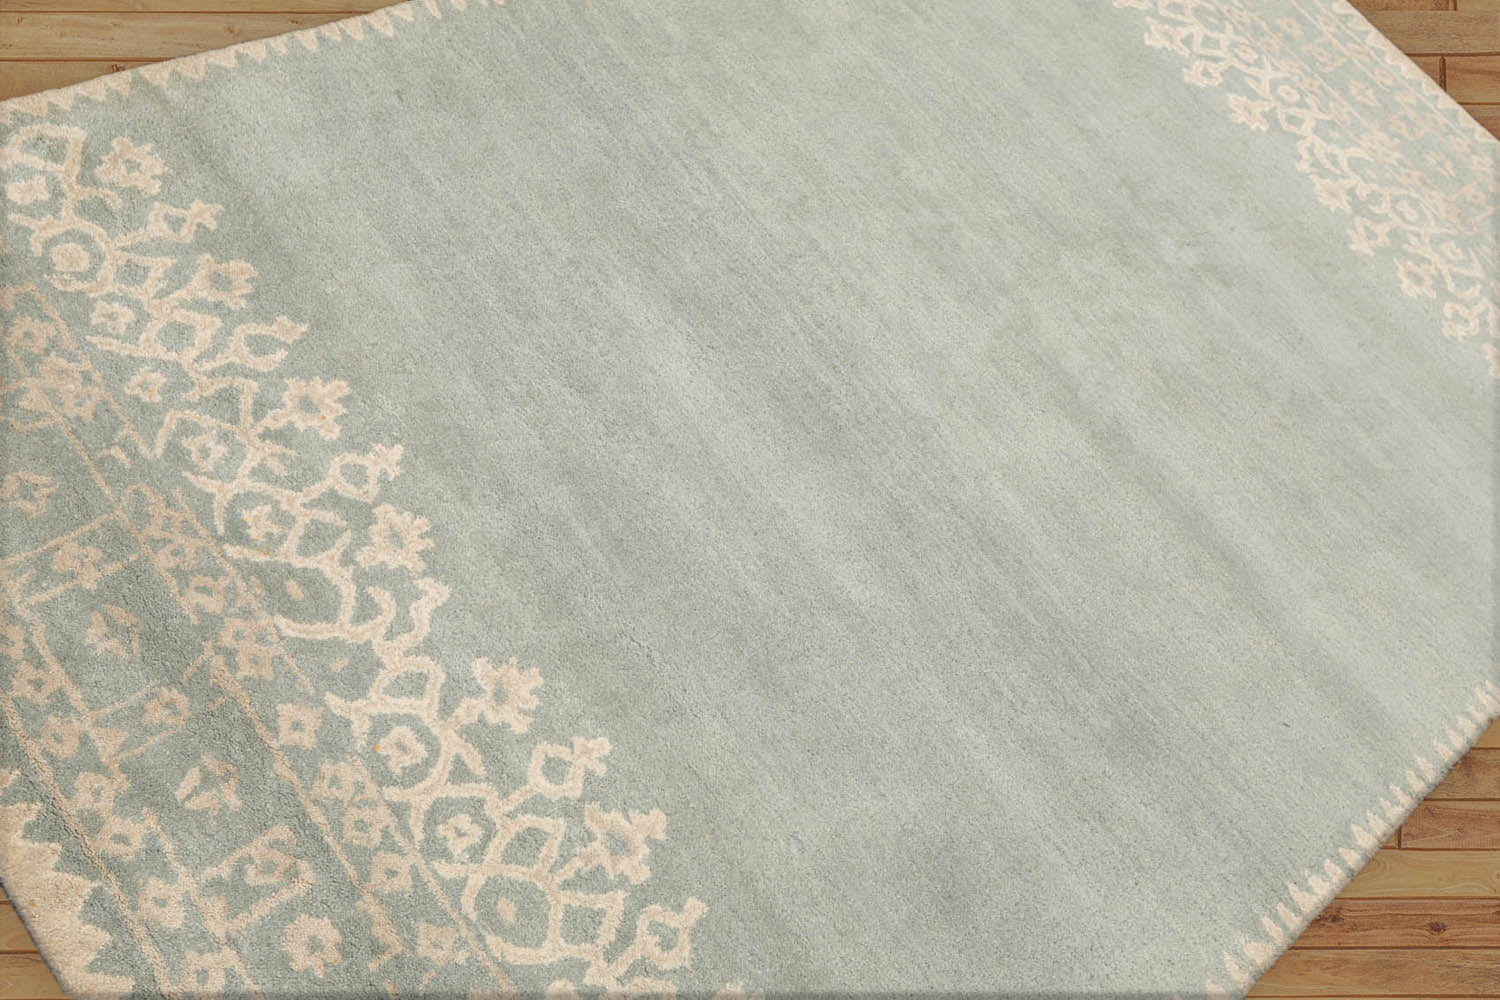 Maiyah 5x8 Hand Tufted Hand Made 100% Wool Patterned Designer Transitional Oriental Area Rug Aqua, Beige Color